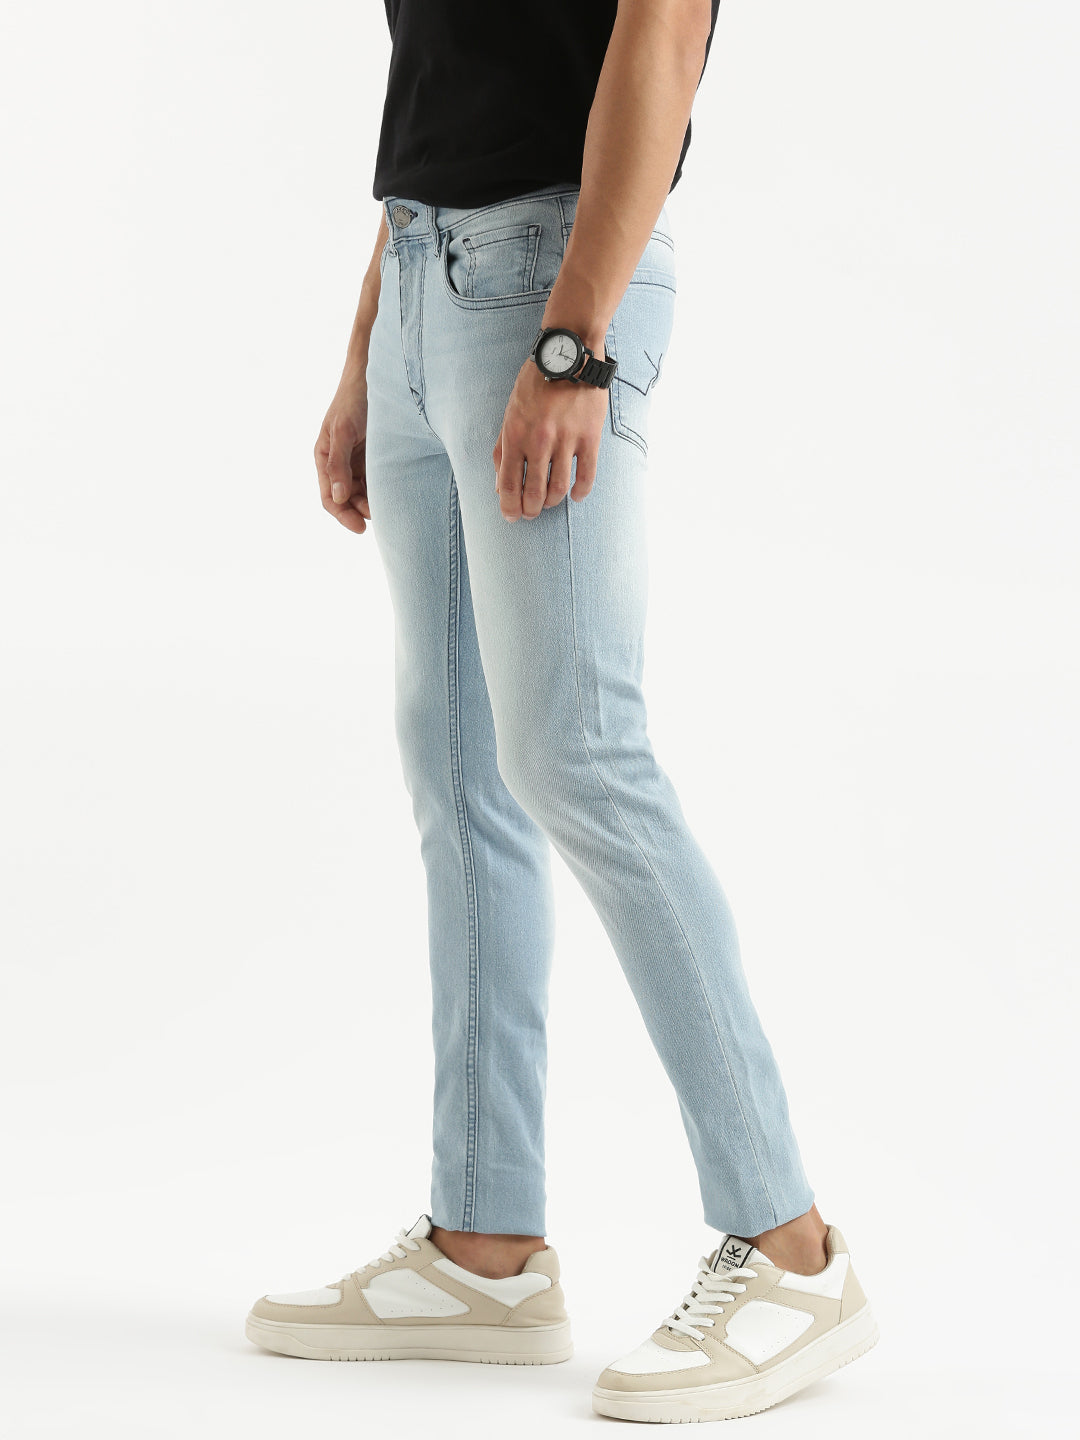 Chic Skinny Fit Jeans